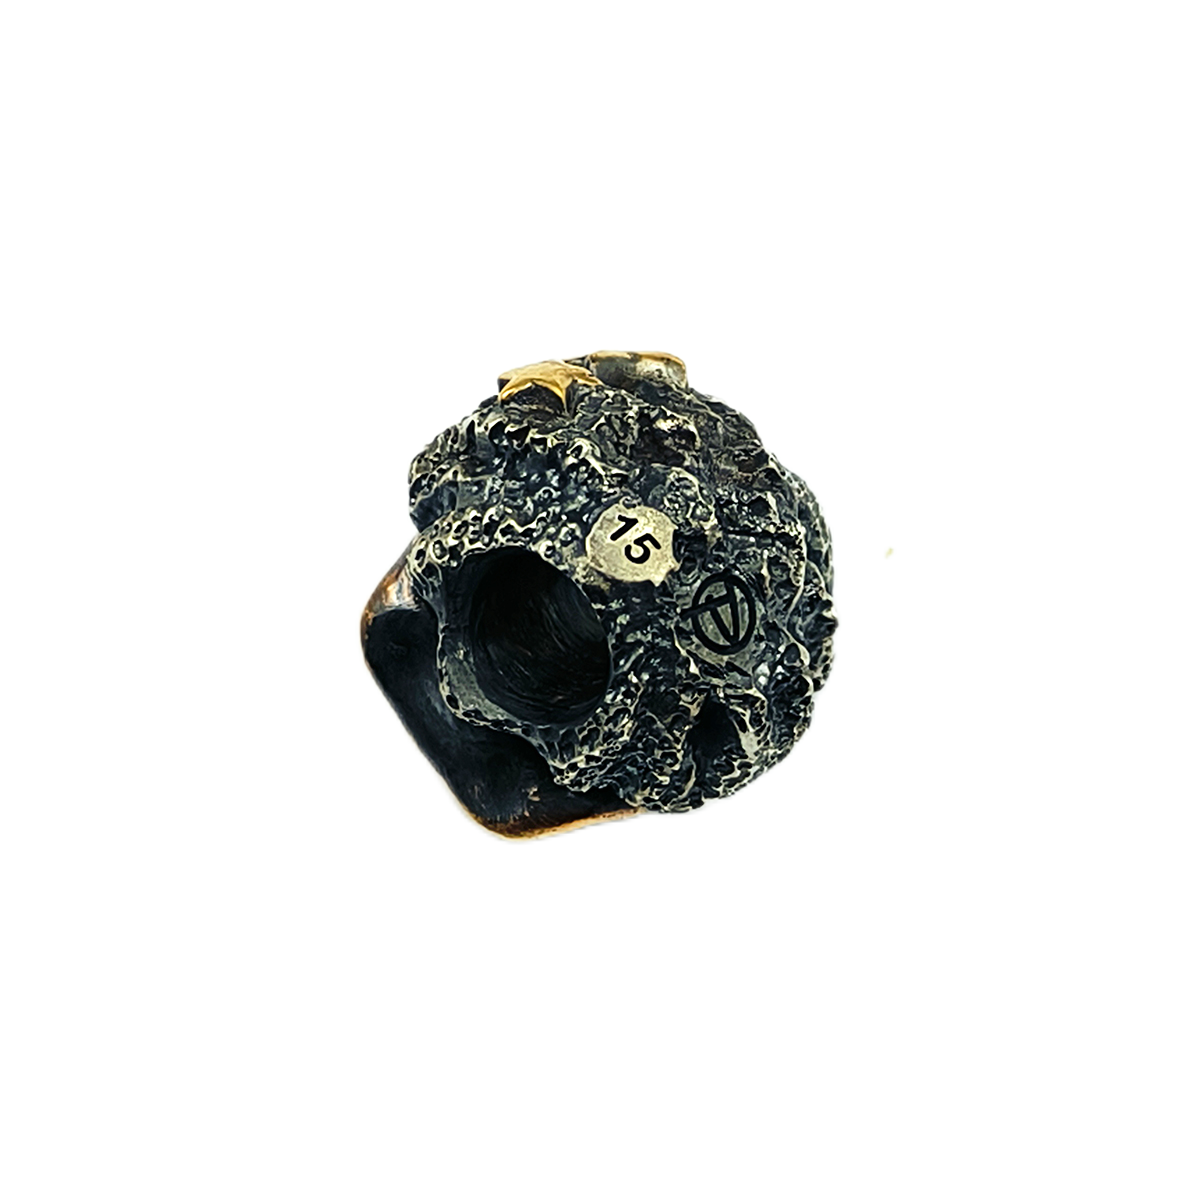 Phase Objects Bronze Lion Beads Custom Made GearBLog Exclusive Limit